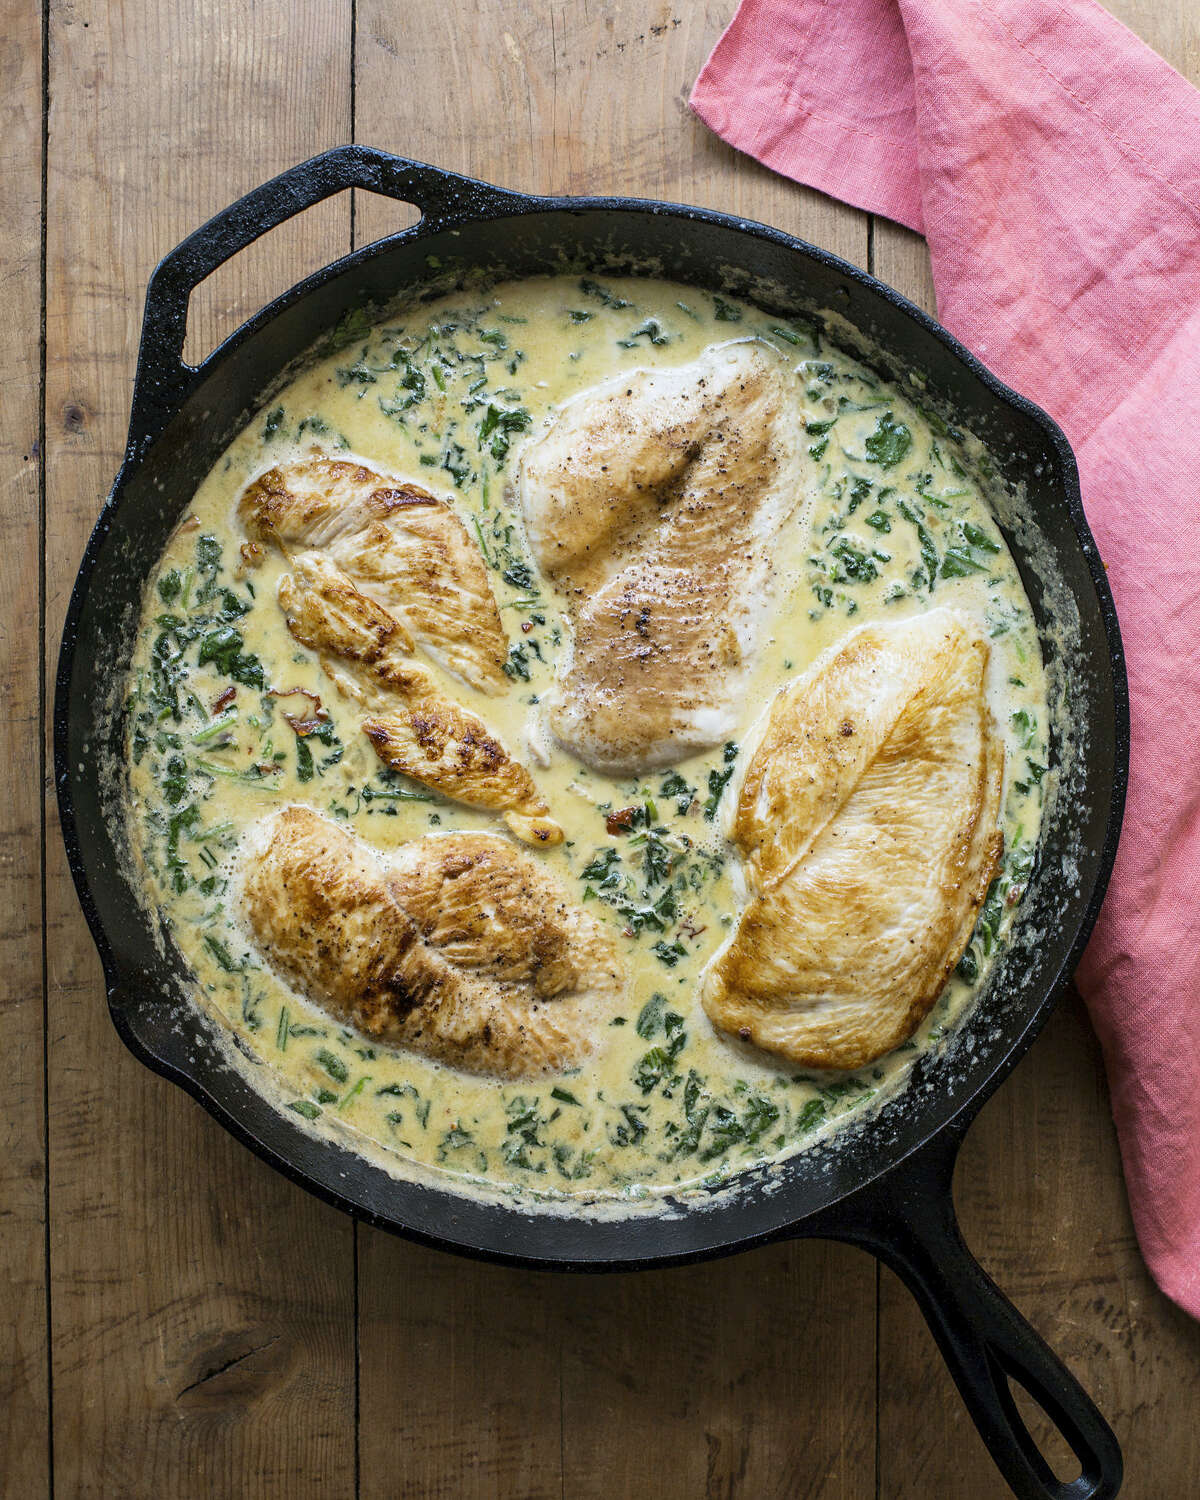 When in doubt, choose comfort food, like chicken with spinach in cream sauce.